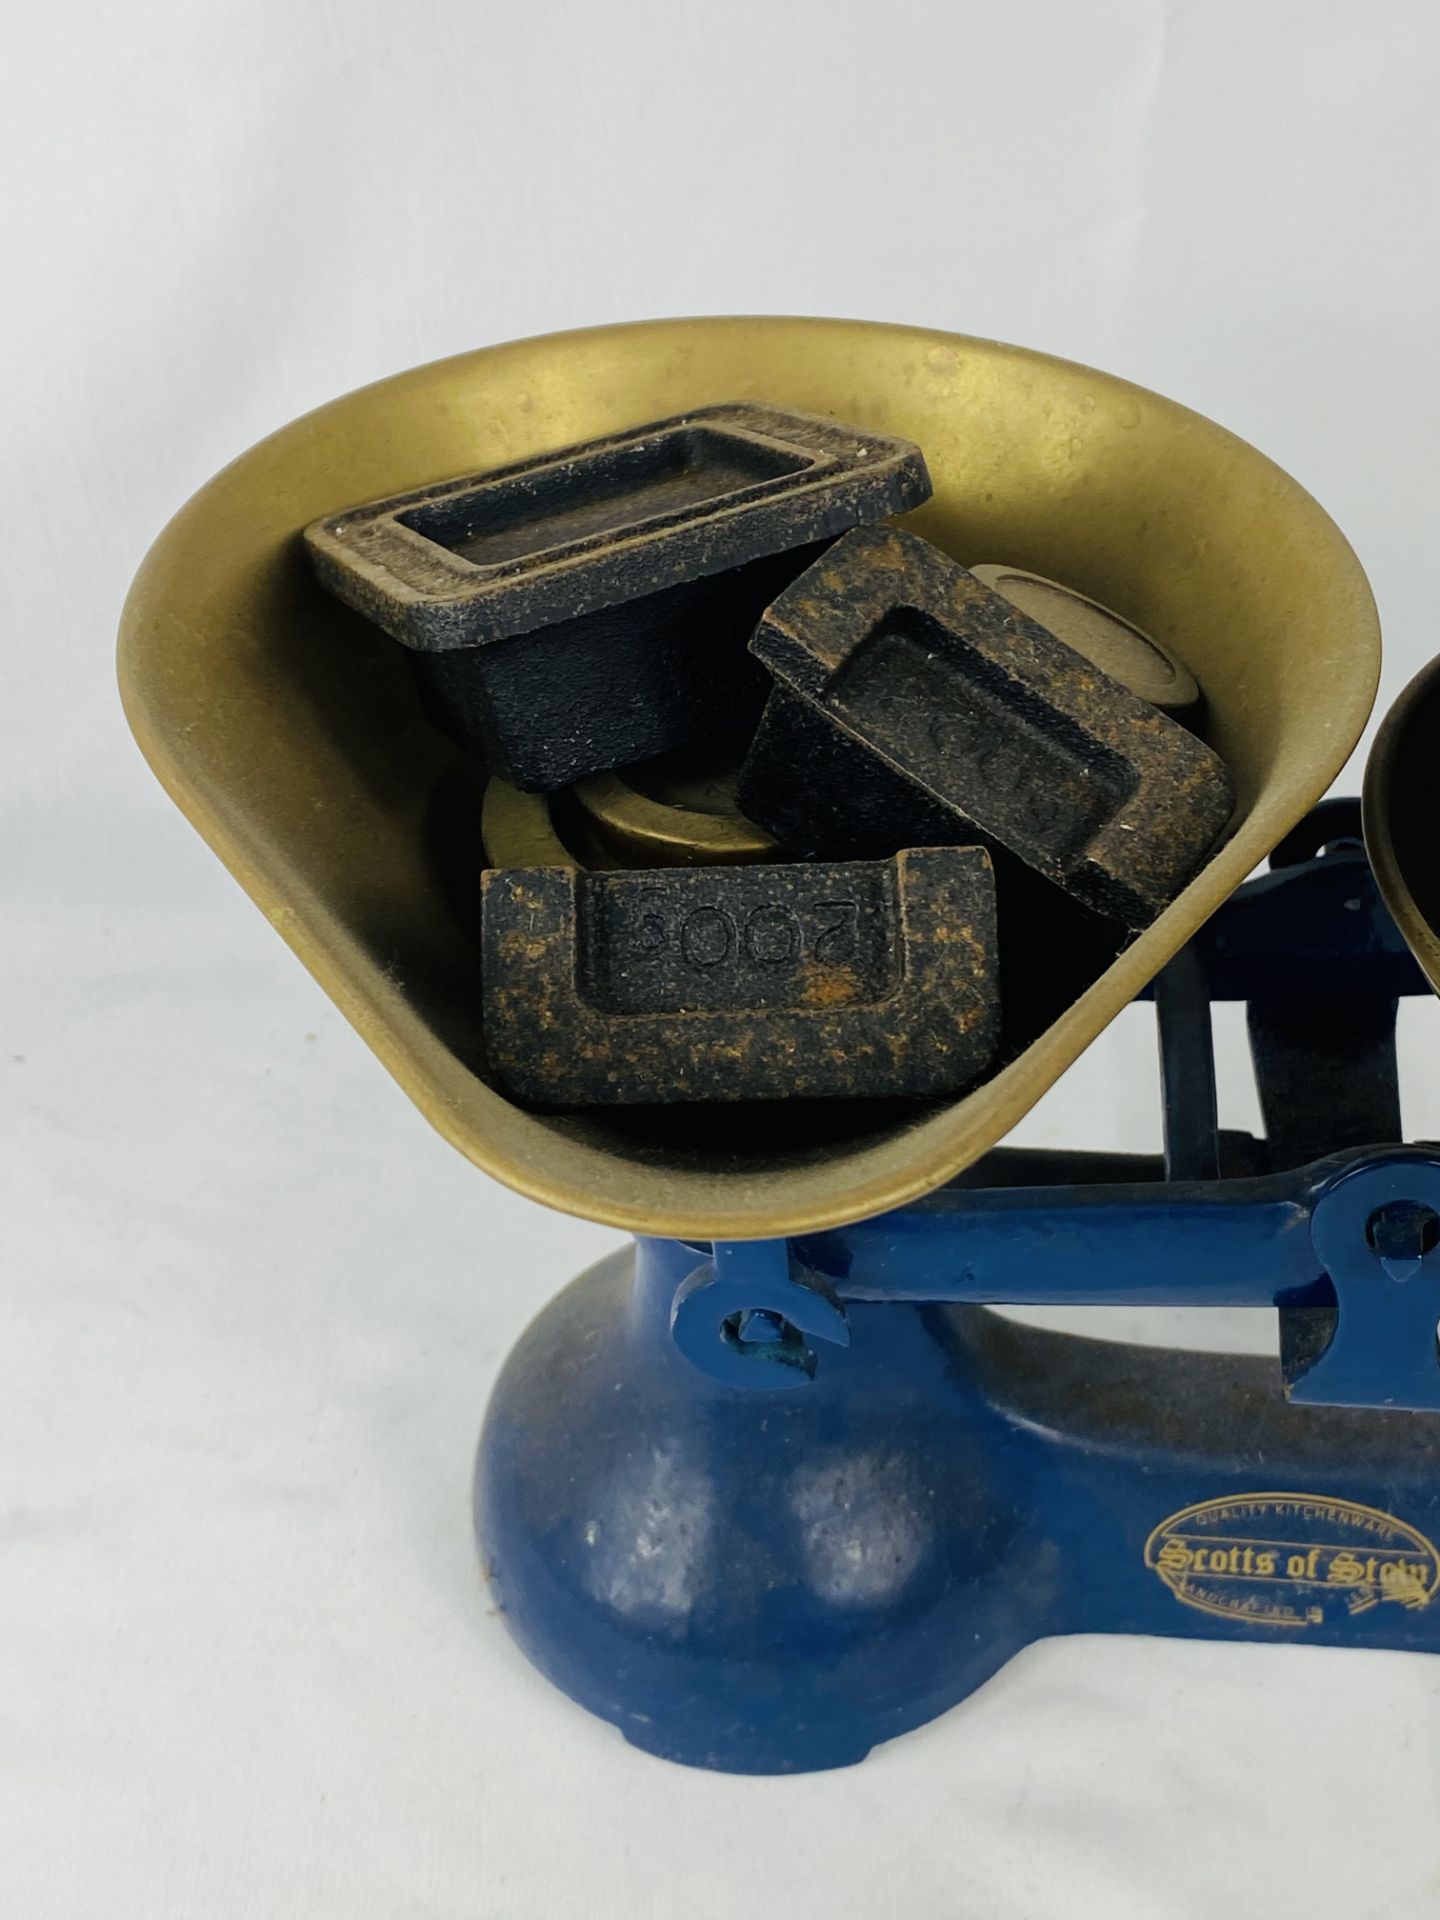 Scotts of Stow kitchen scales - Image 3 of 4